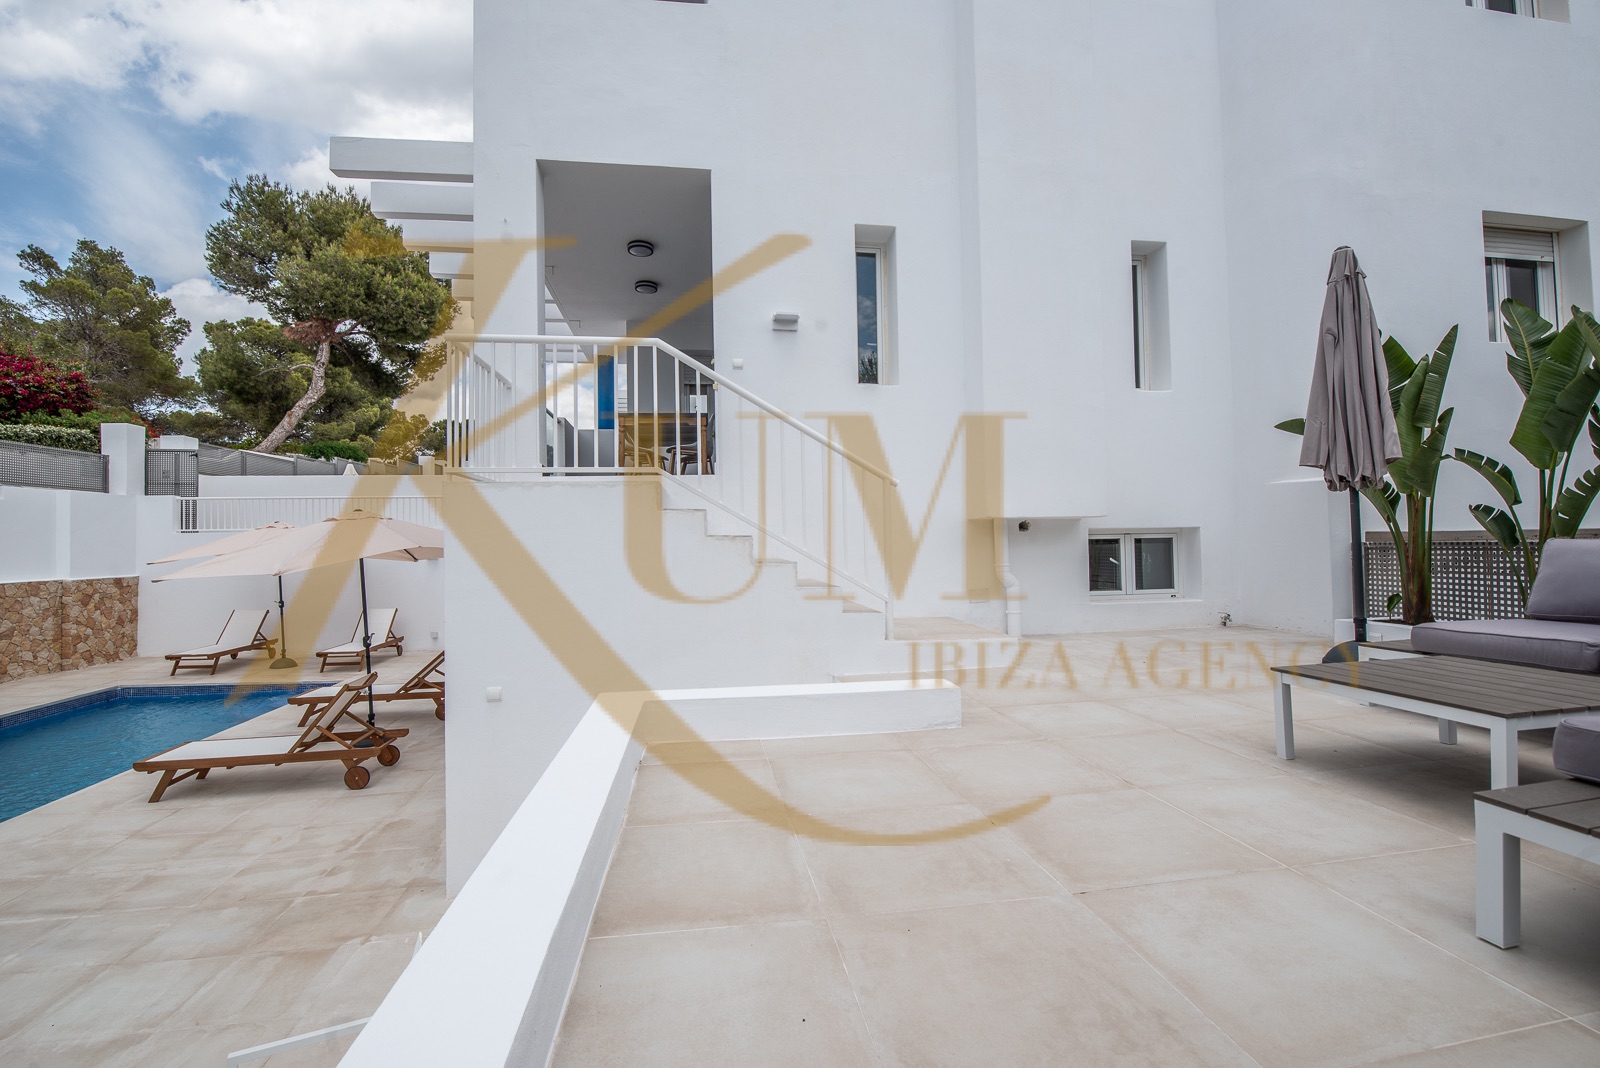 Beautiful house with private pool and guest apartment for rent.